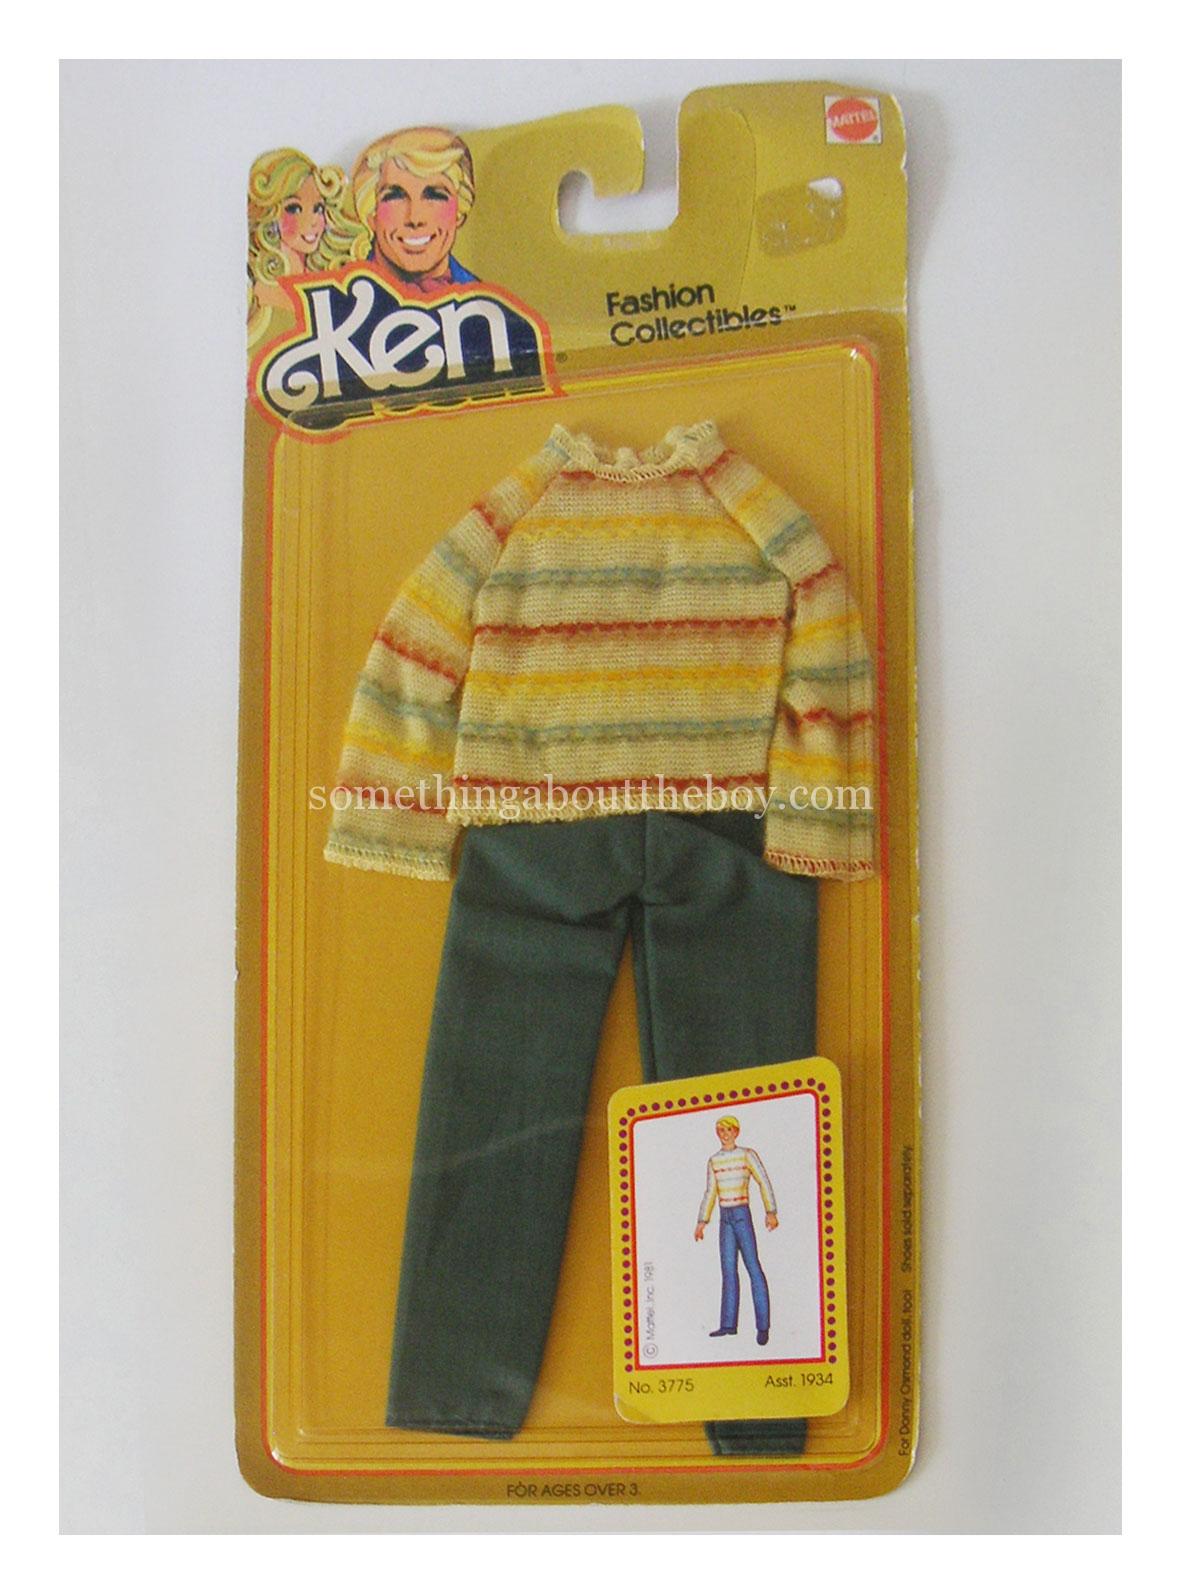 1982 Fashion Collectibles #3775 in original packaging